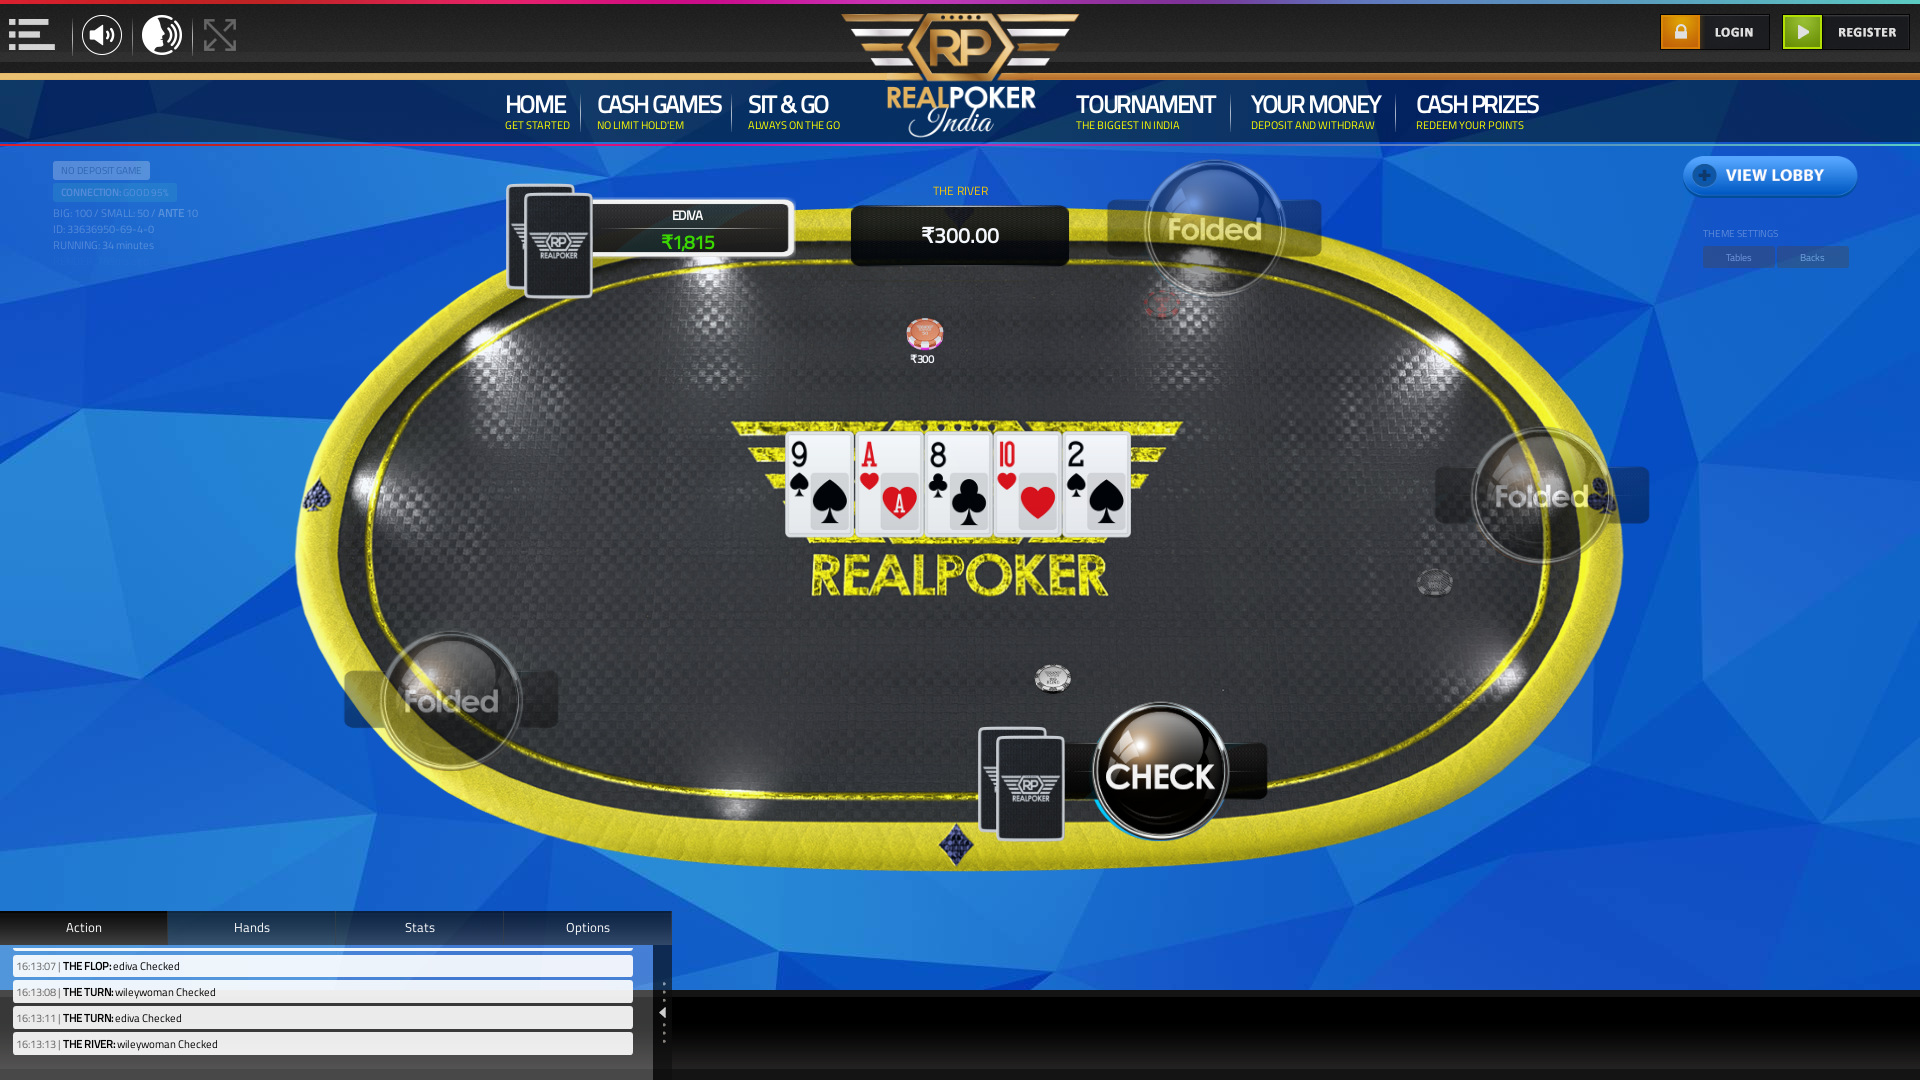 Online poker on a 10 player table in the 34th minute match up